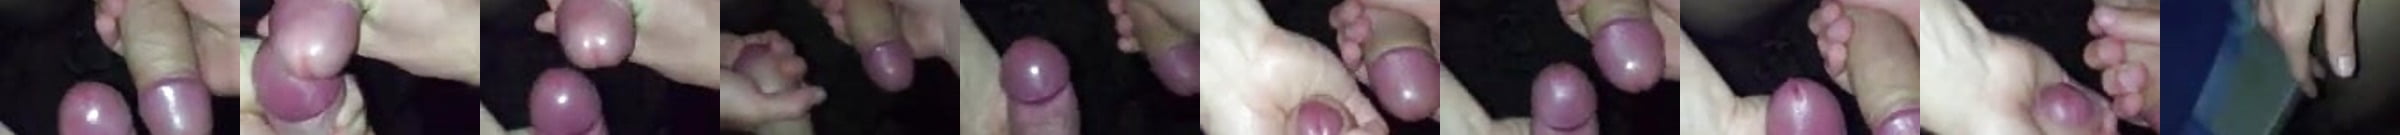 New Vid Frottage Cock2cock And Docking By Censoredvagina